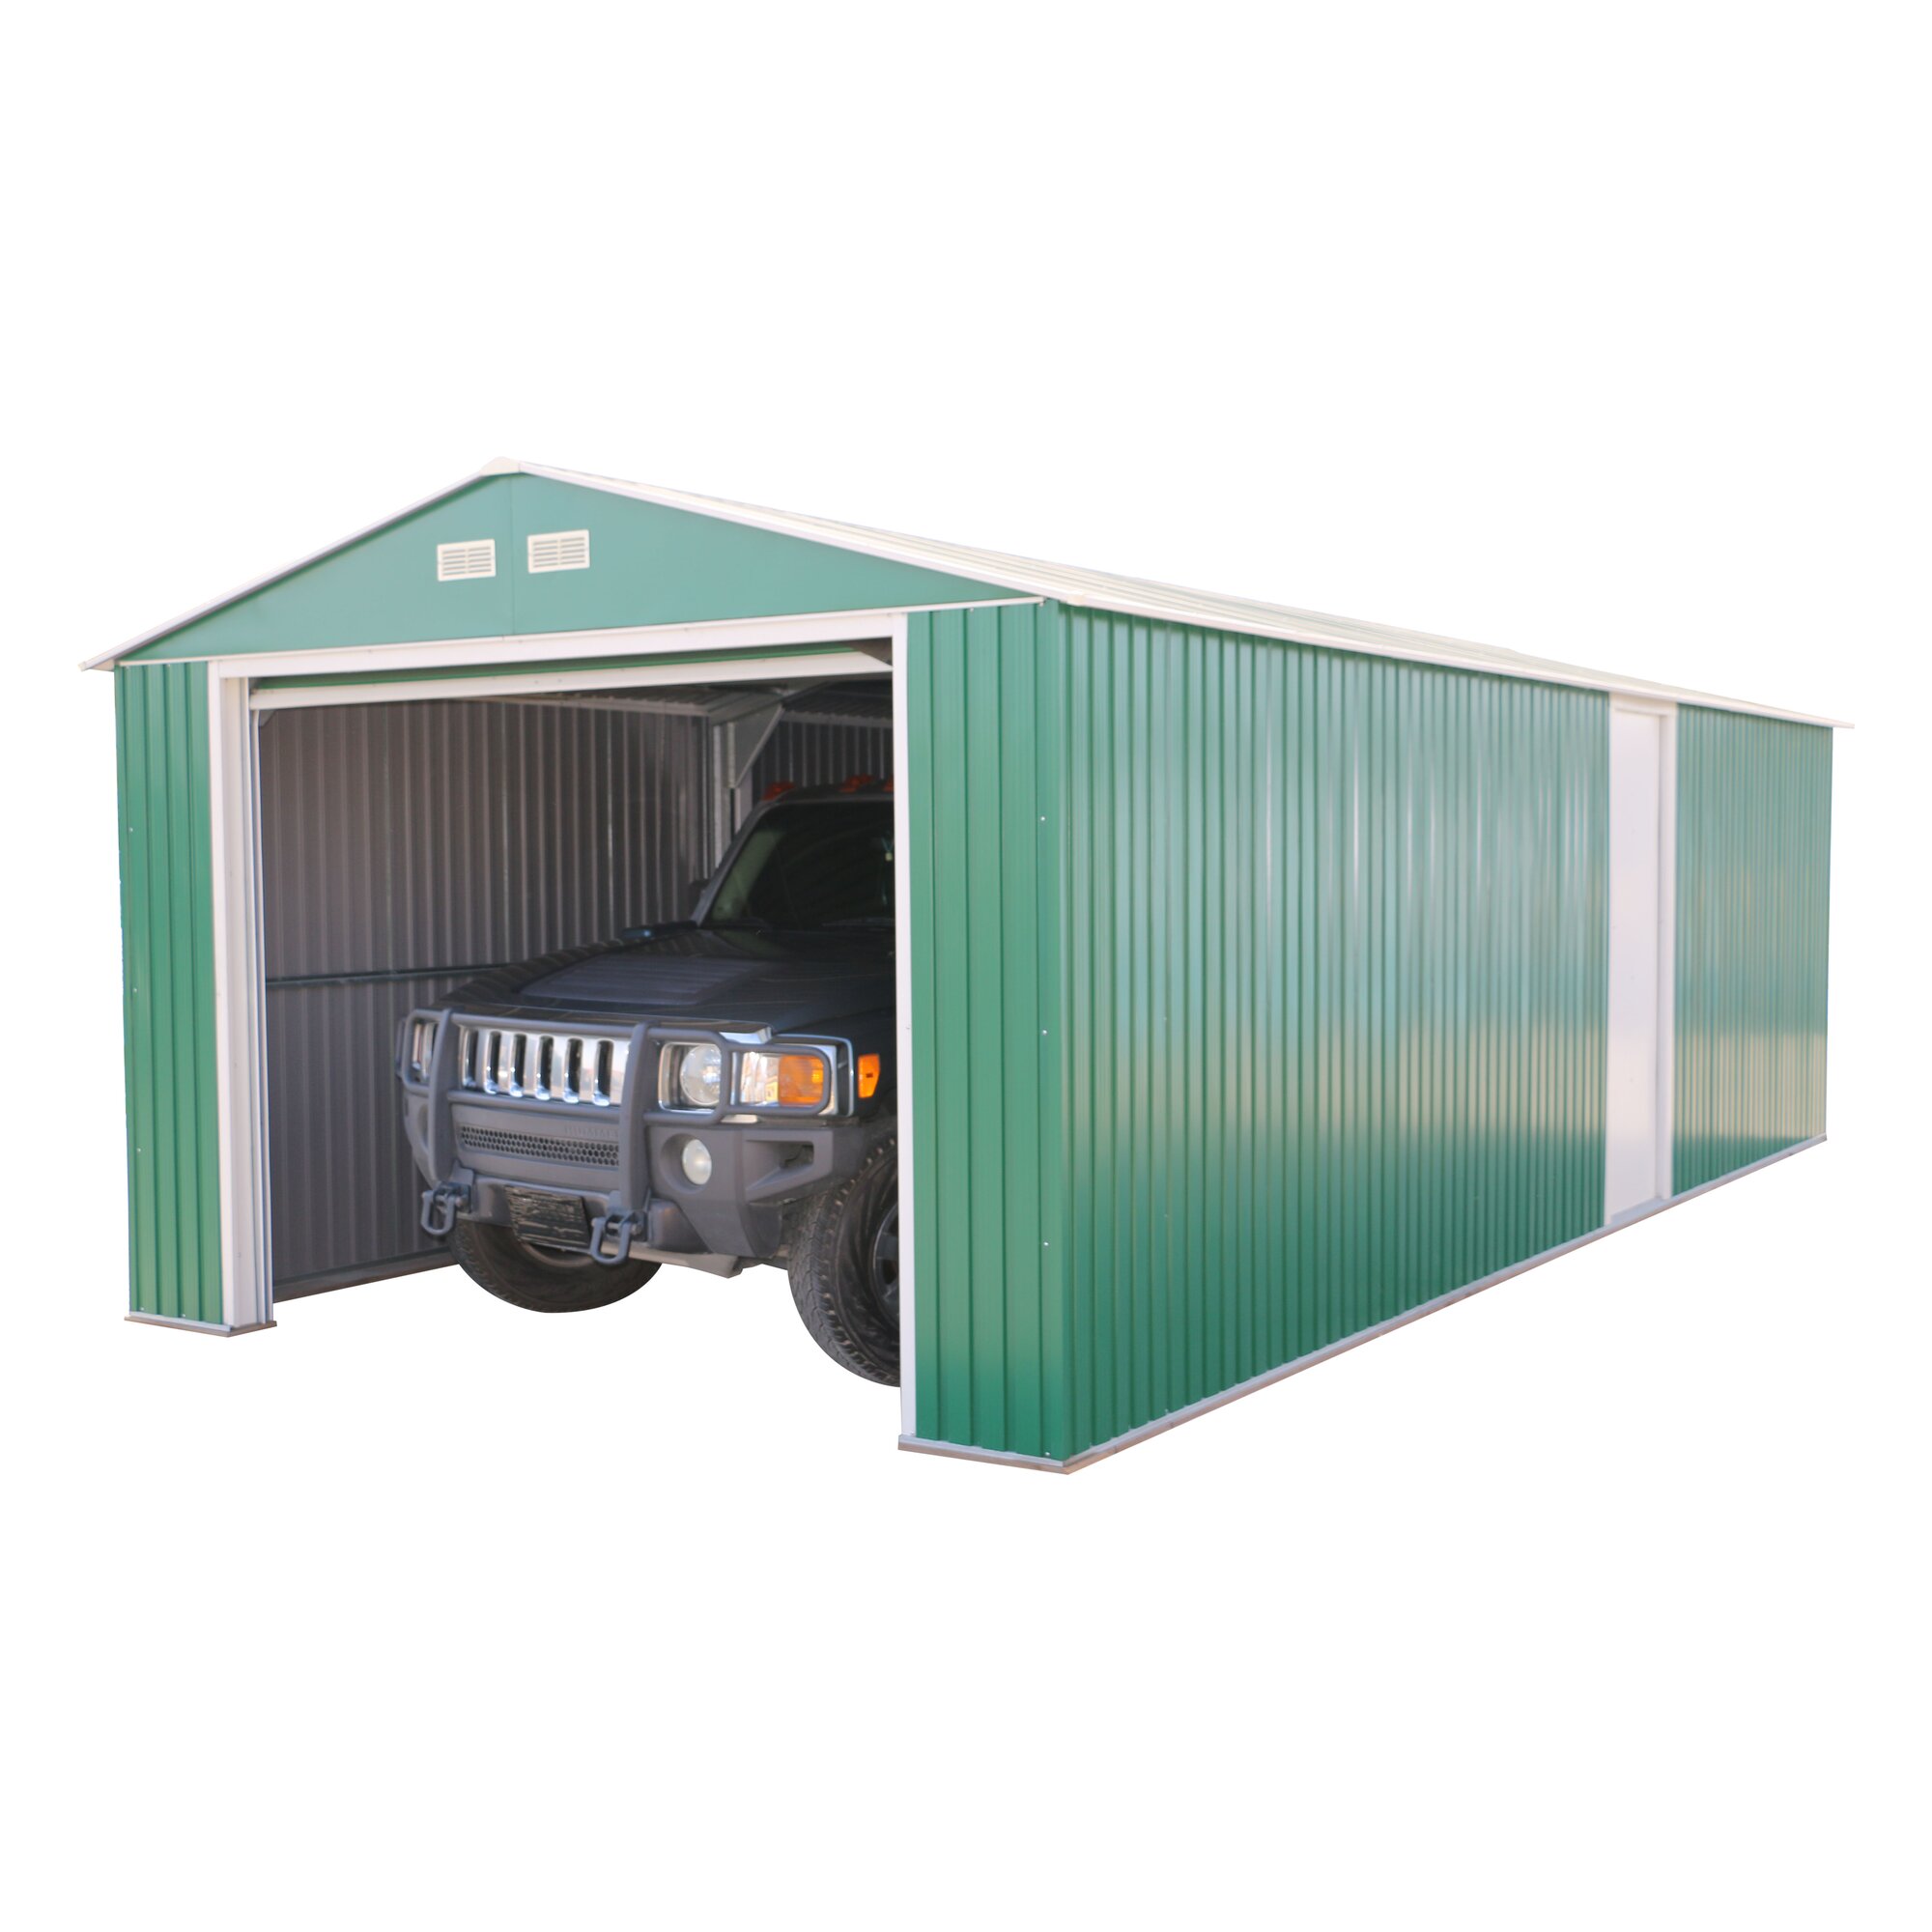 Duramax Imperial 12 Ft. W x 20 Ft. D Metal Garage Shed 